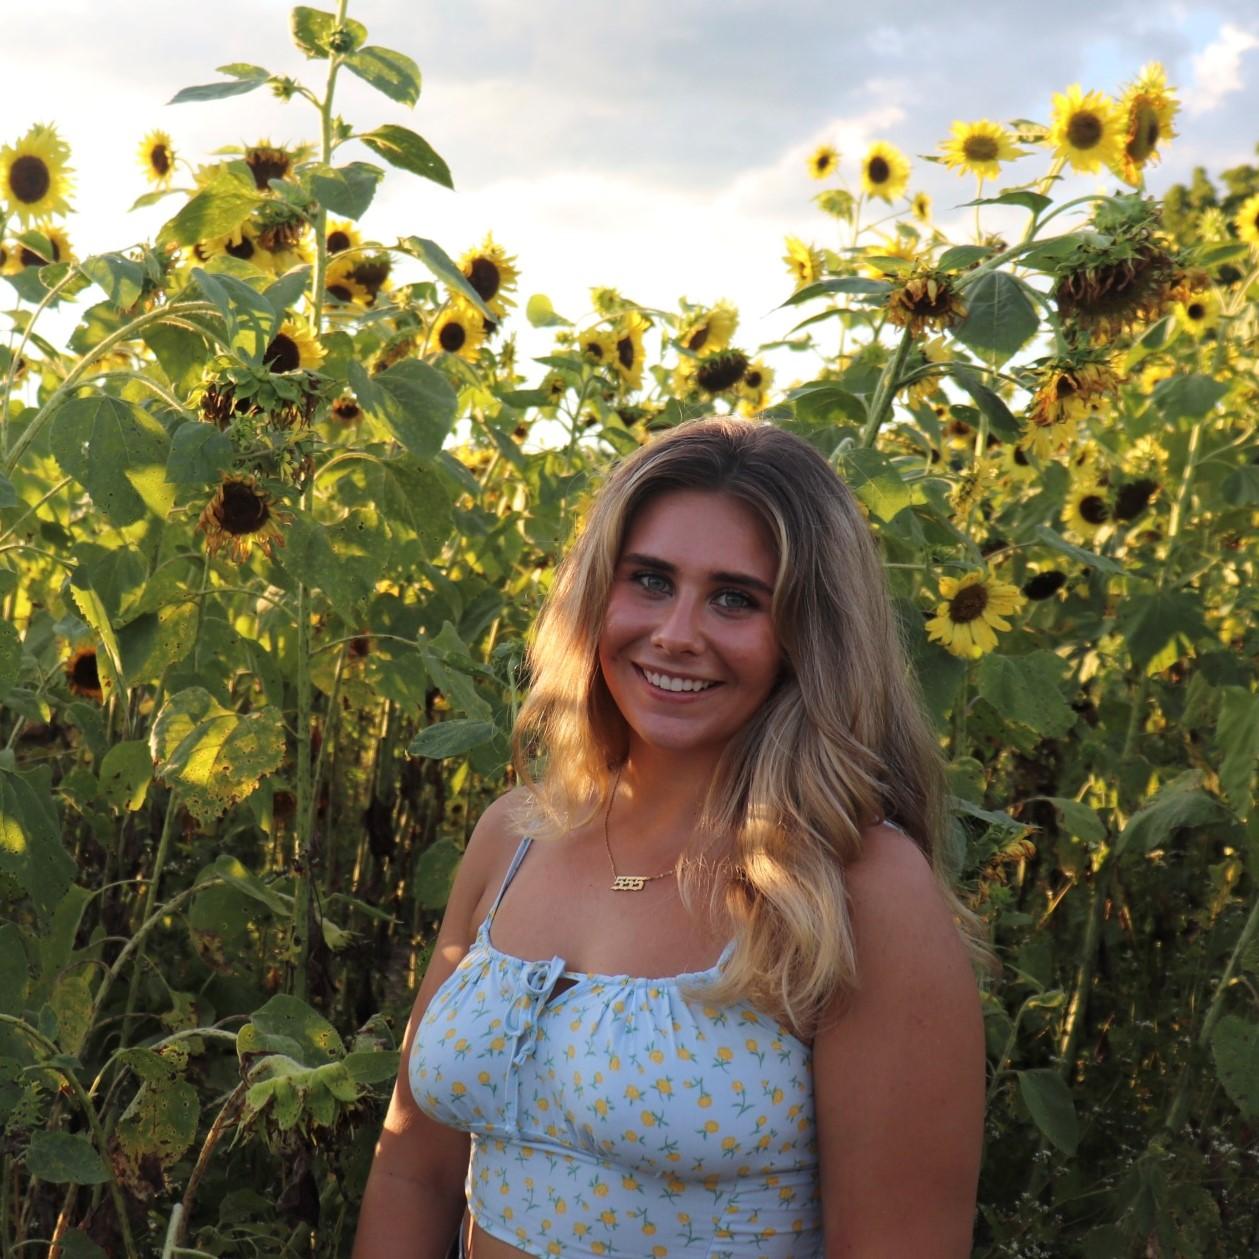 Grace is wearing a light blue shirt and standing in a field of sunflowers